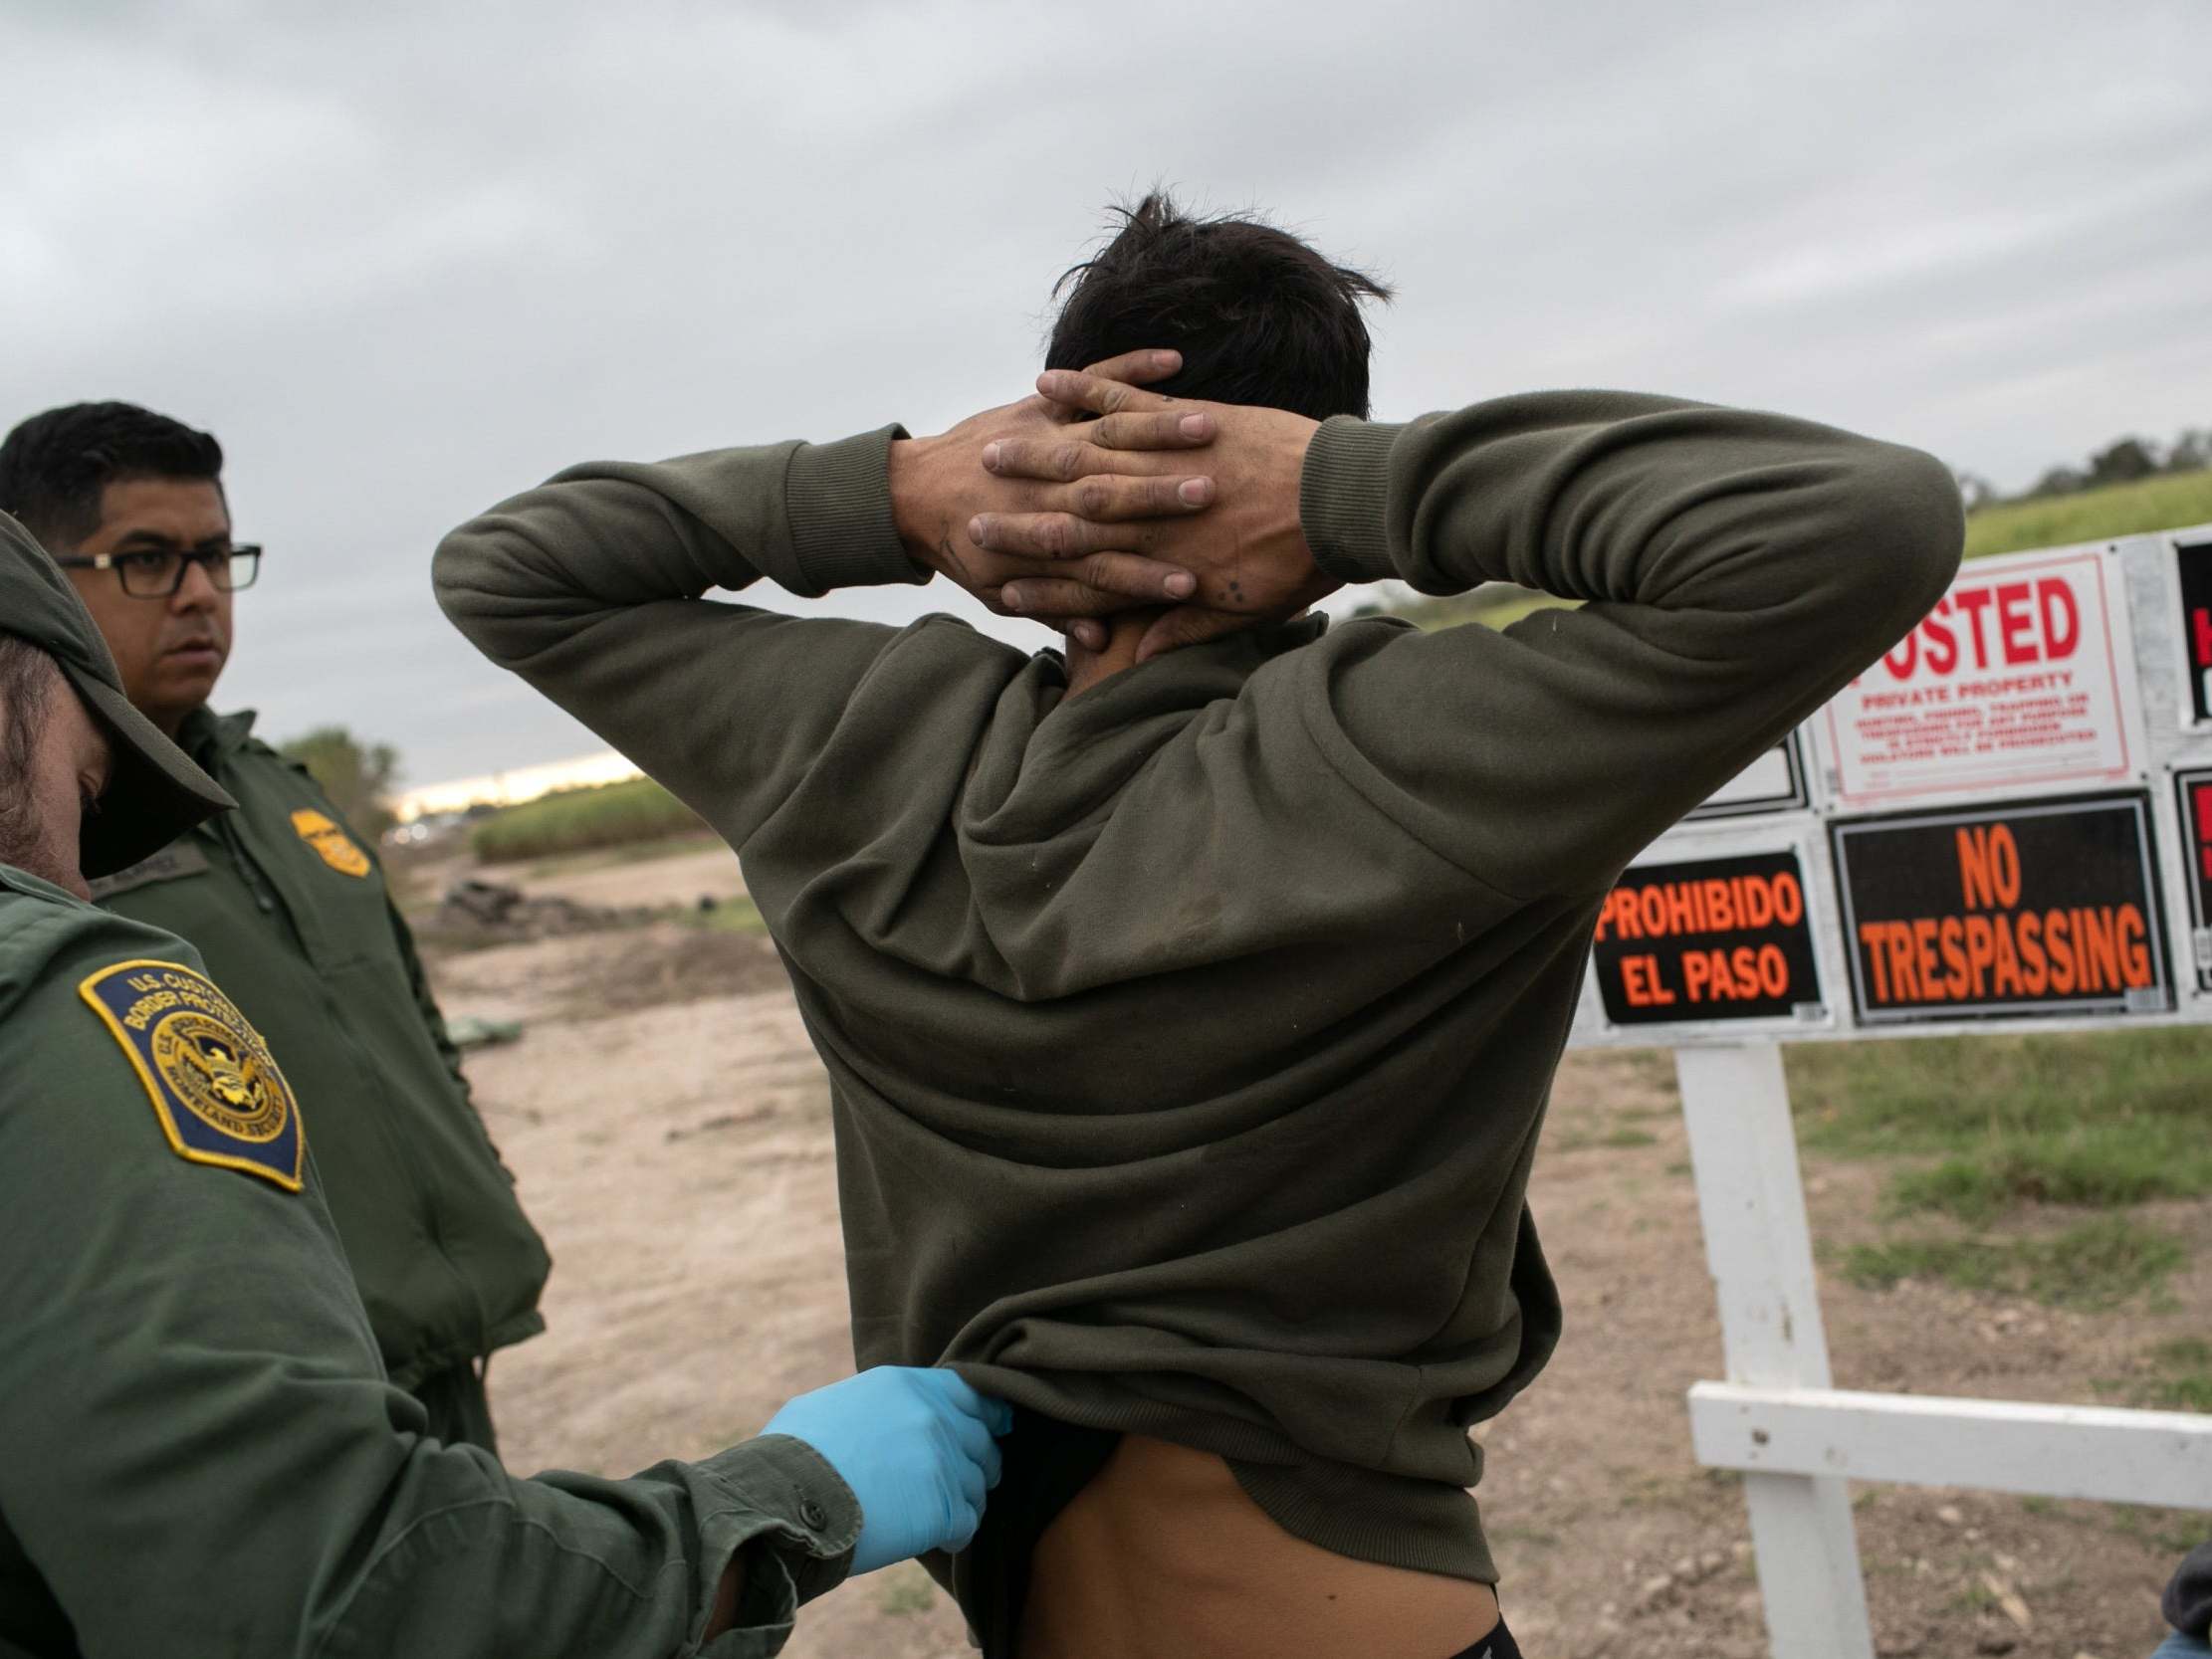 US Border Patrol agents detain undocumented immigrants caught near a section of privately-built border wall under construction